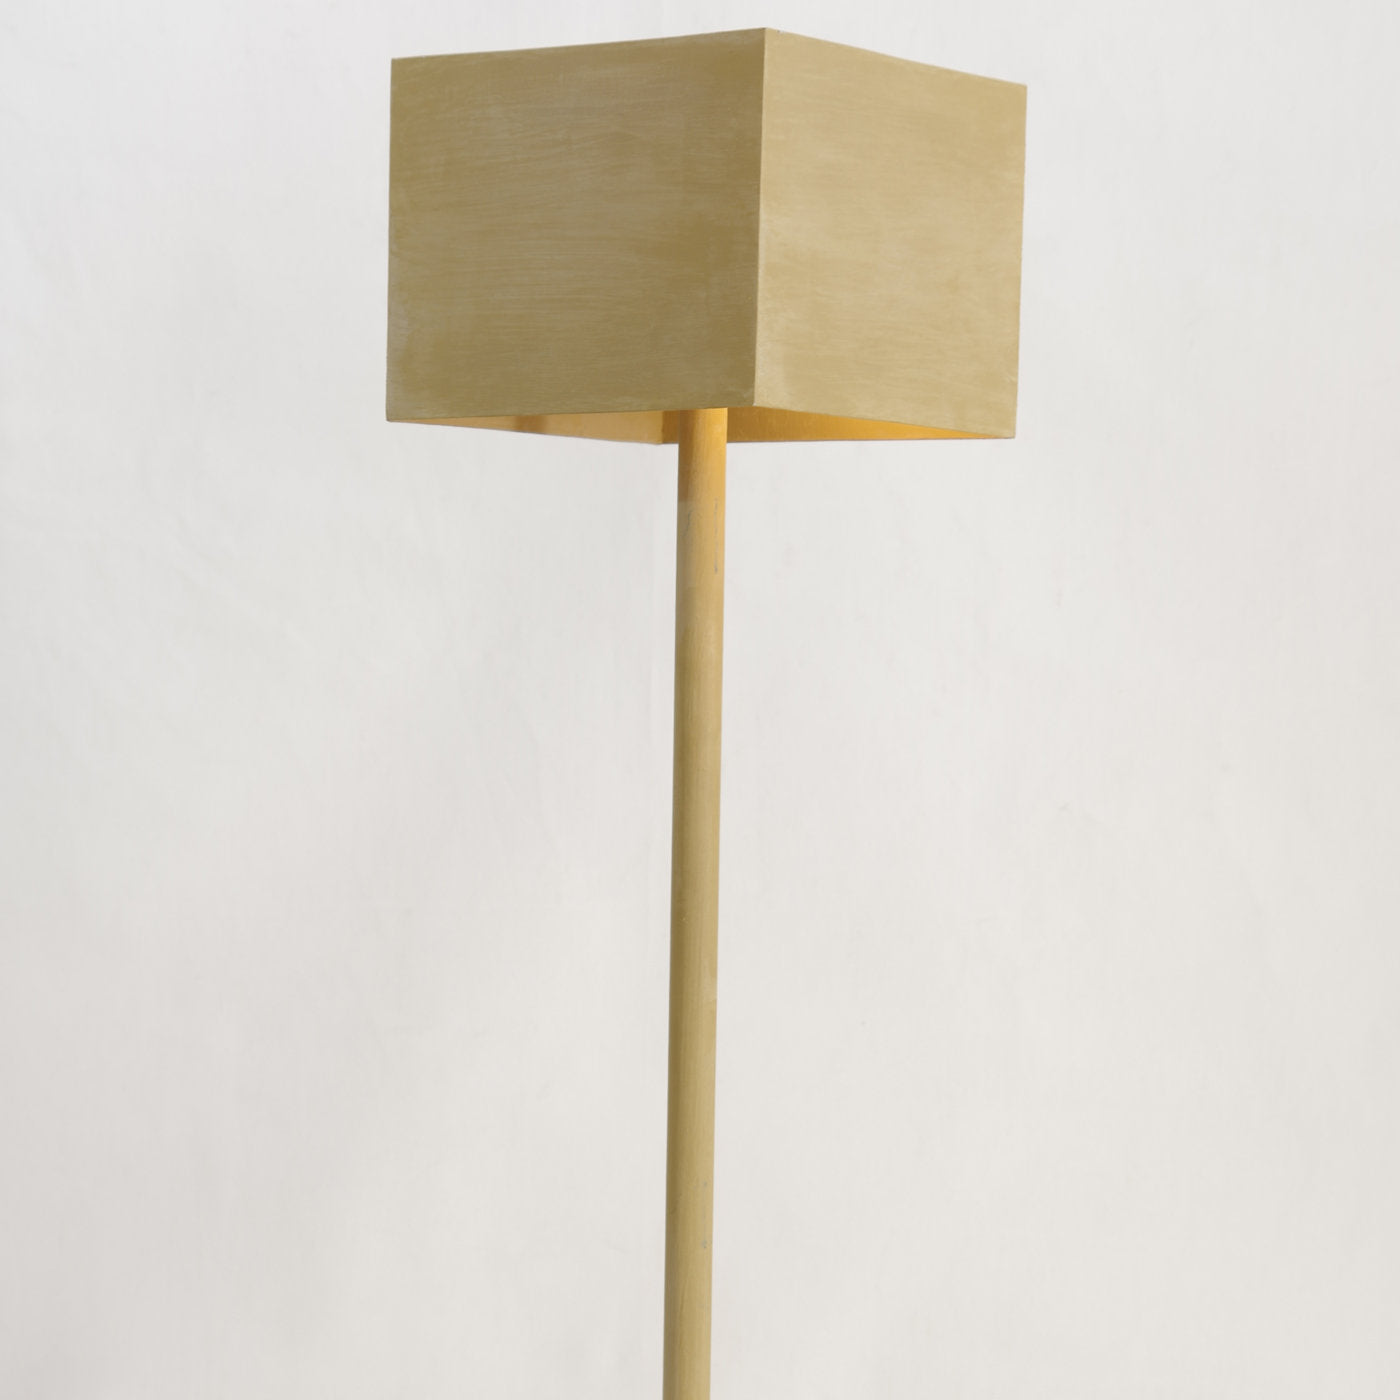 Ratio 1 Tall Table Lamp - Alternative view 2